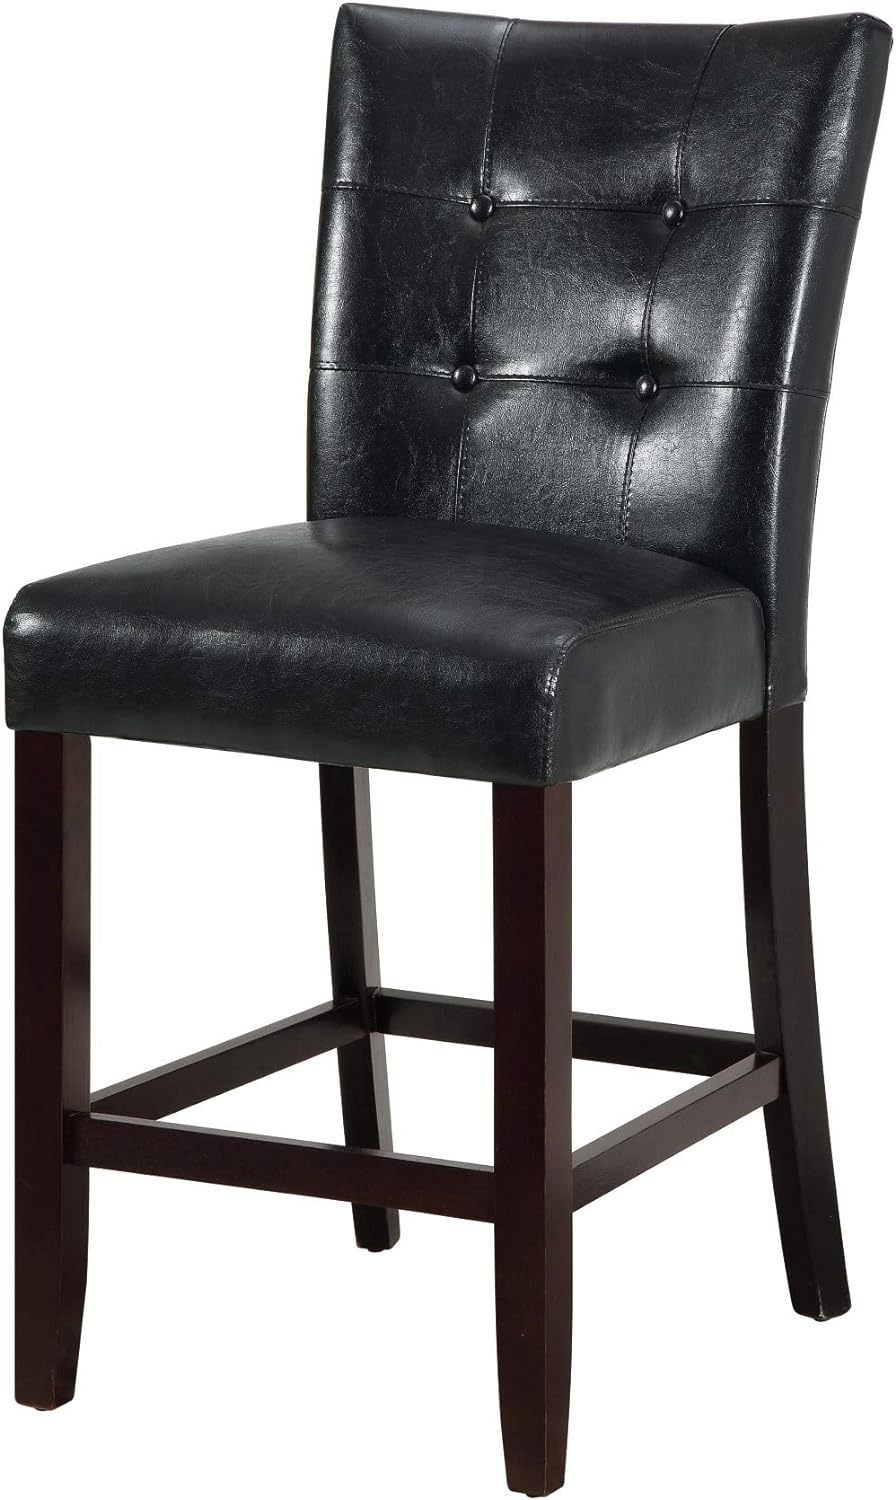 Modern Counter Height Chairs Black Faux Leather Tufted Set of 2 High Chairs Dining Seating